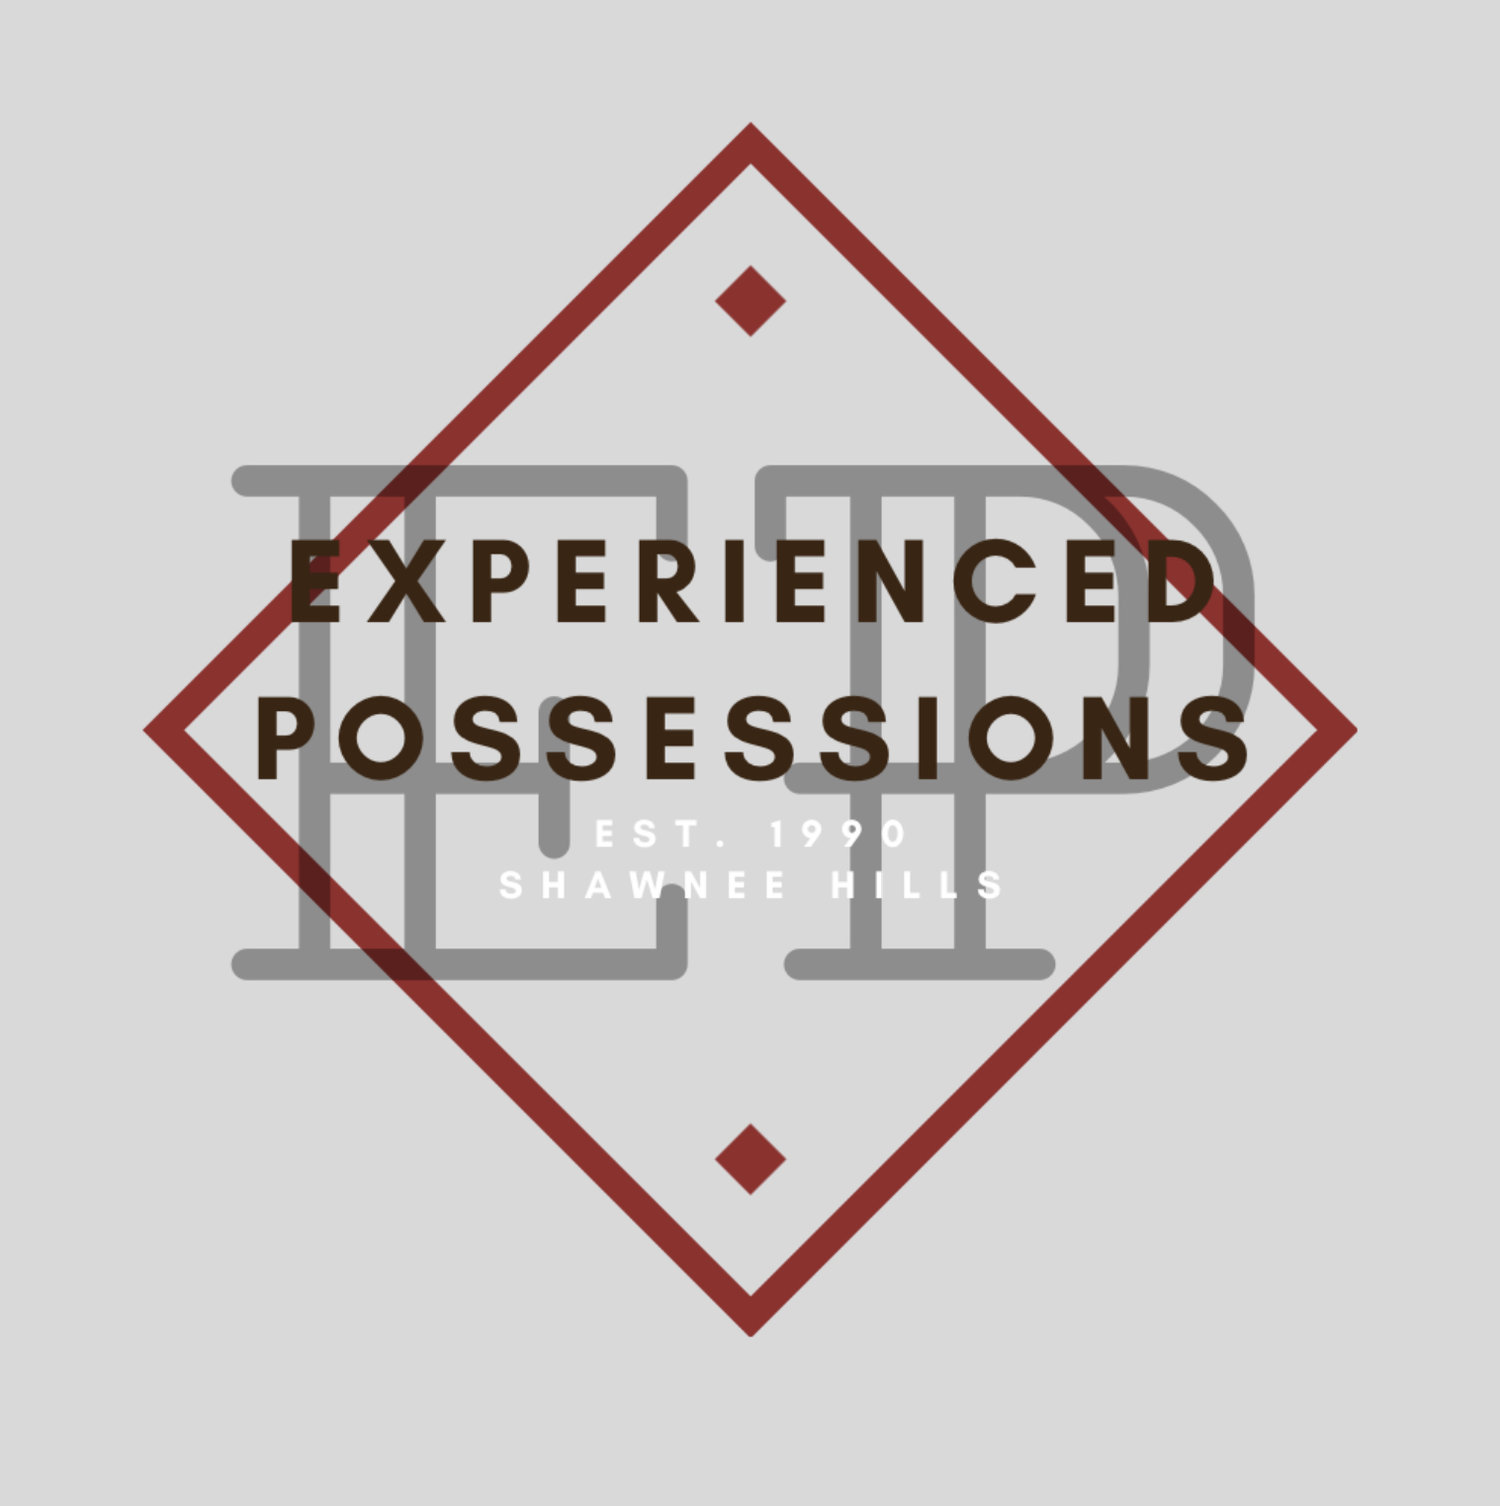 Experienced Possessions 